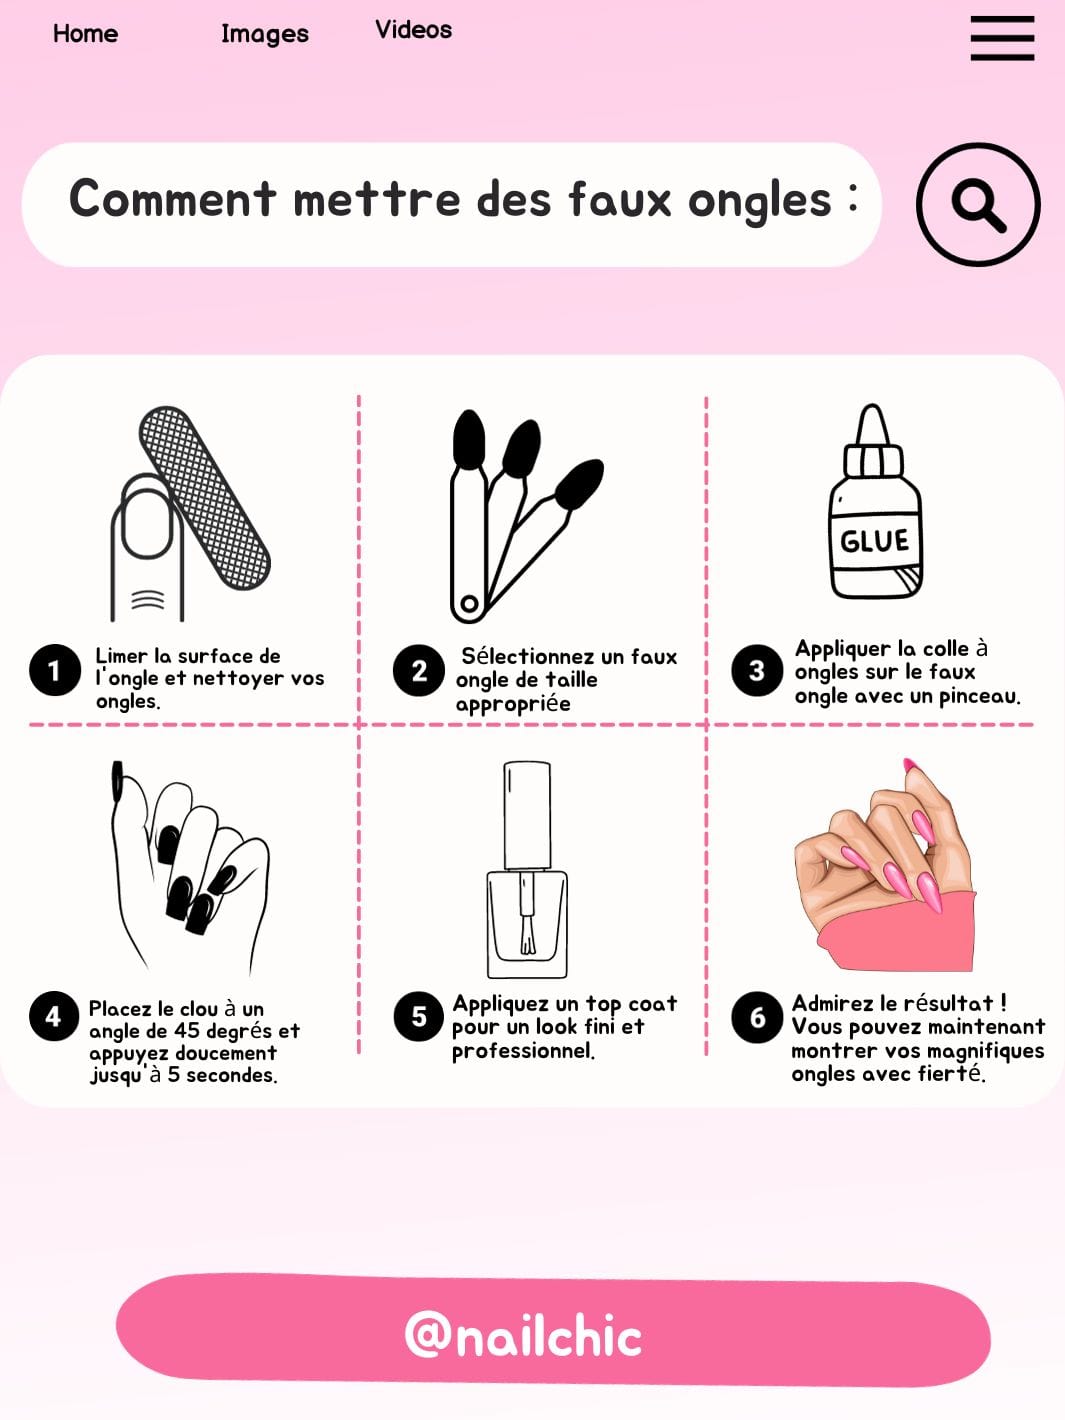 Faux ongle pour mariage Nail Chic